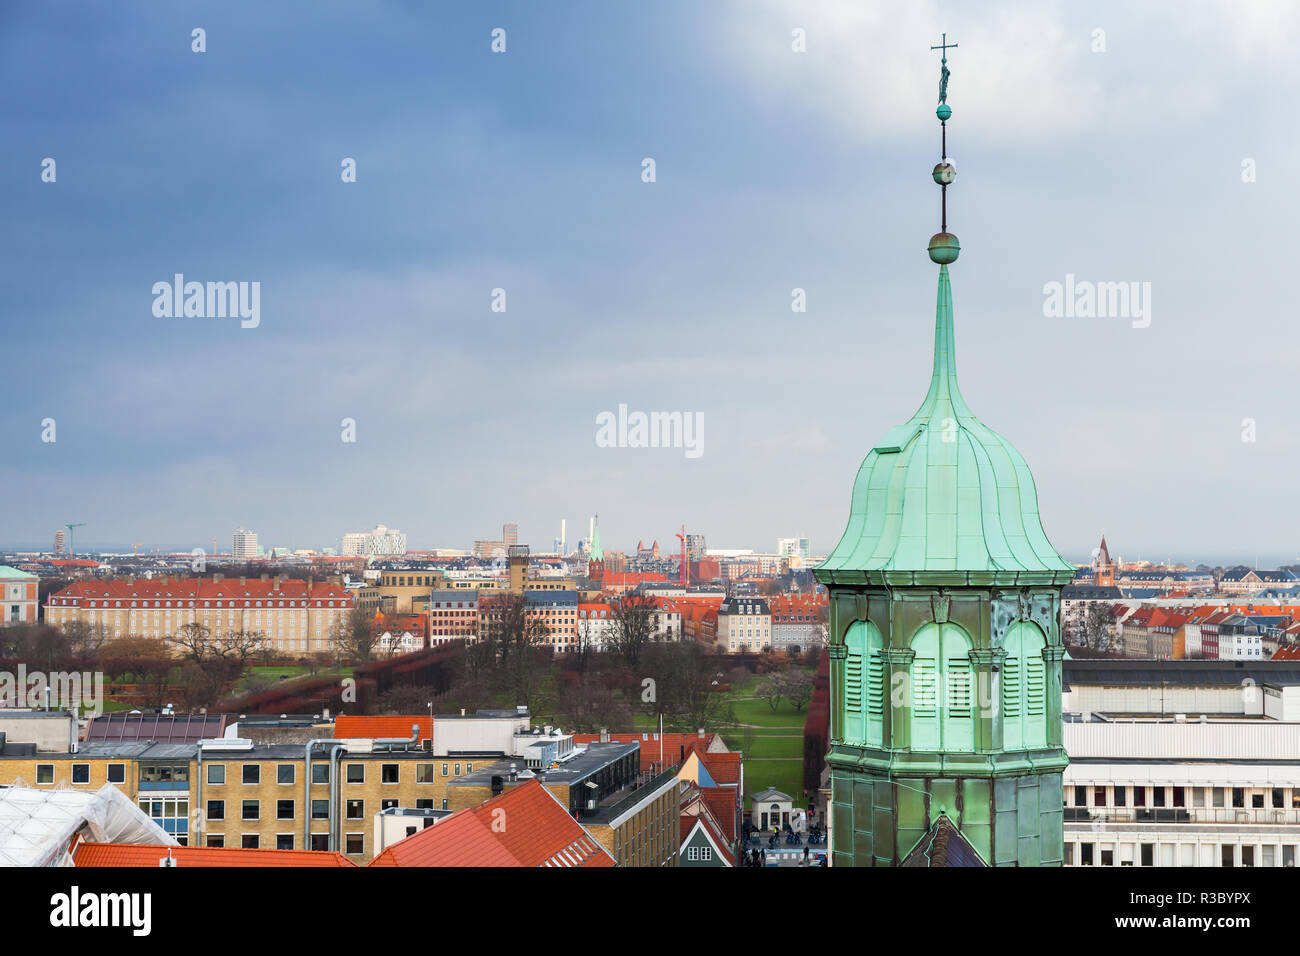 Cityscape of Copenhagen with spire of Trinitatis Church. Photo taken from The Round Tower, popular old city landmark and viewpoint. Denmark Stock Photo